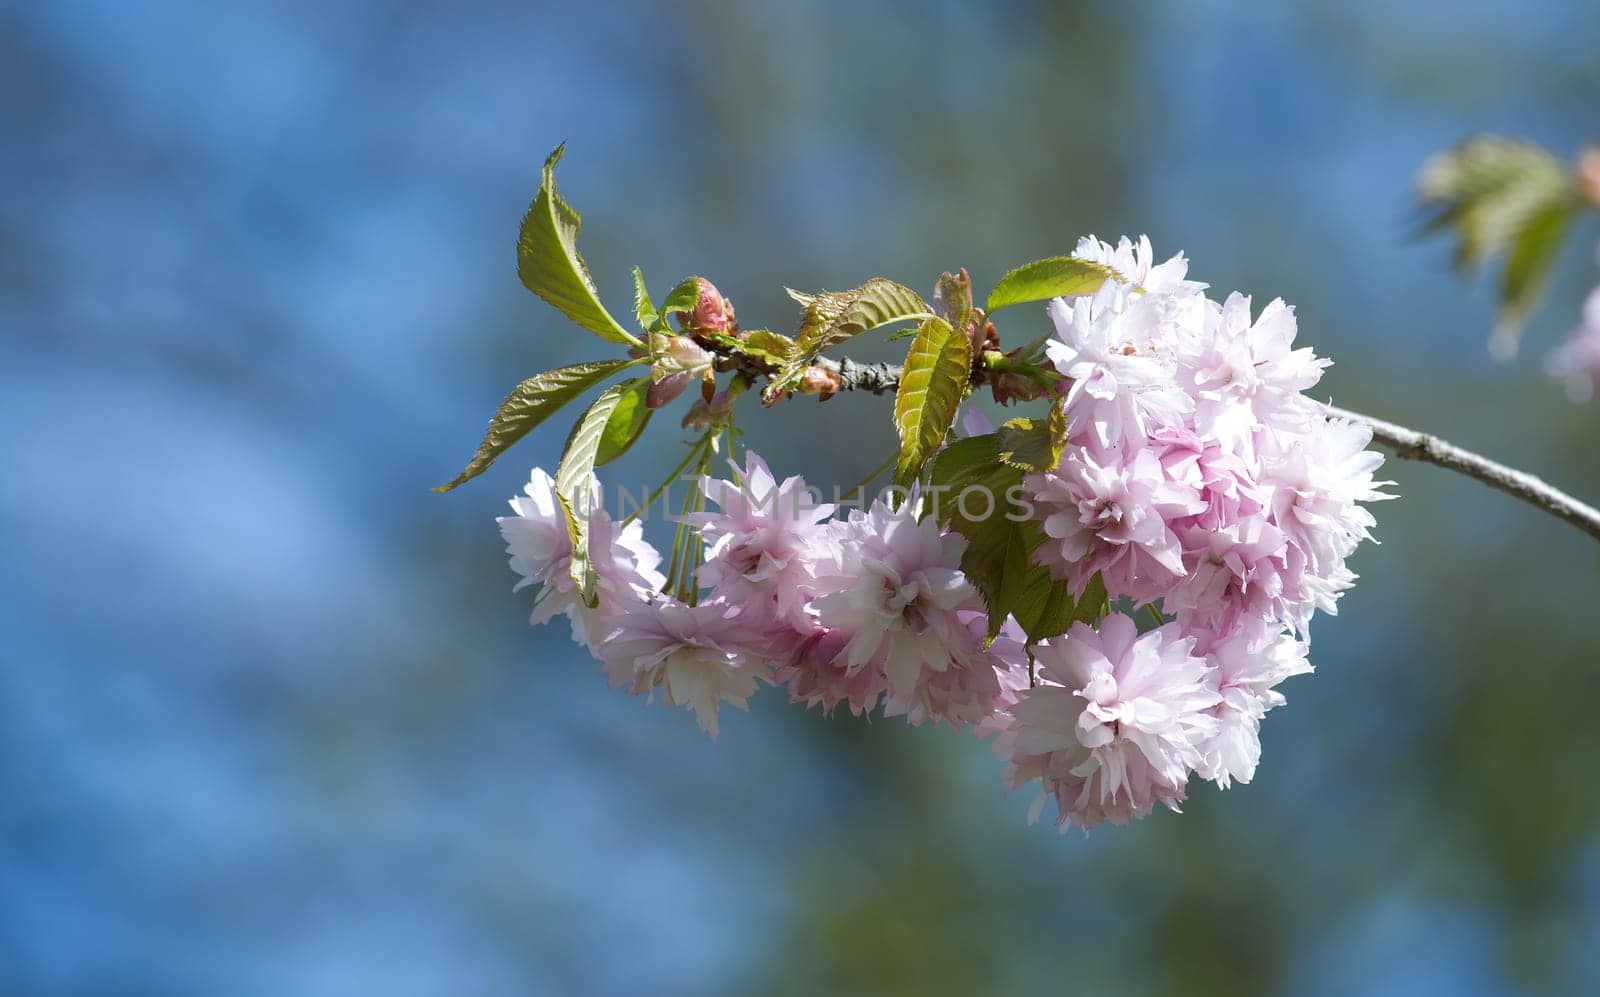 The vivid pink blossoms on the branch contrast with the serene sky above, evoking a feeling of brightness and life. Sakura blossoms on the branch